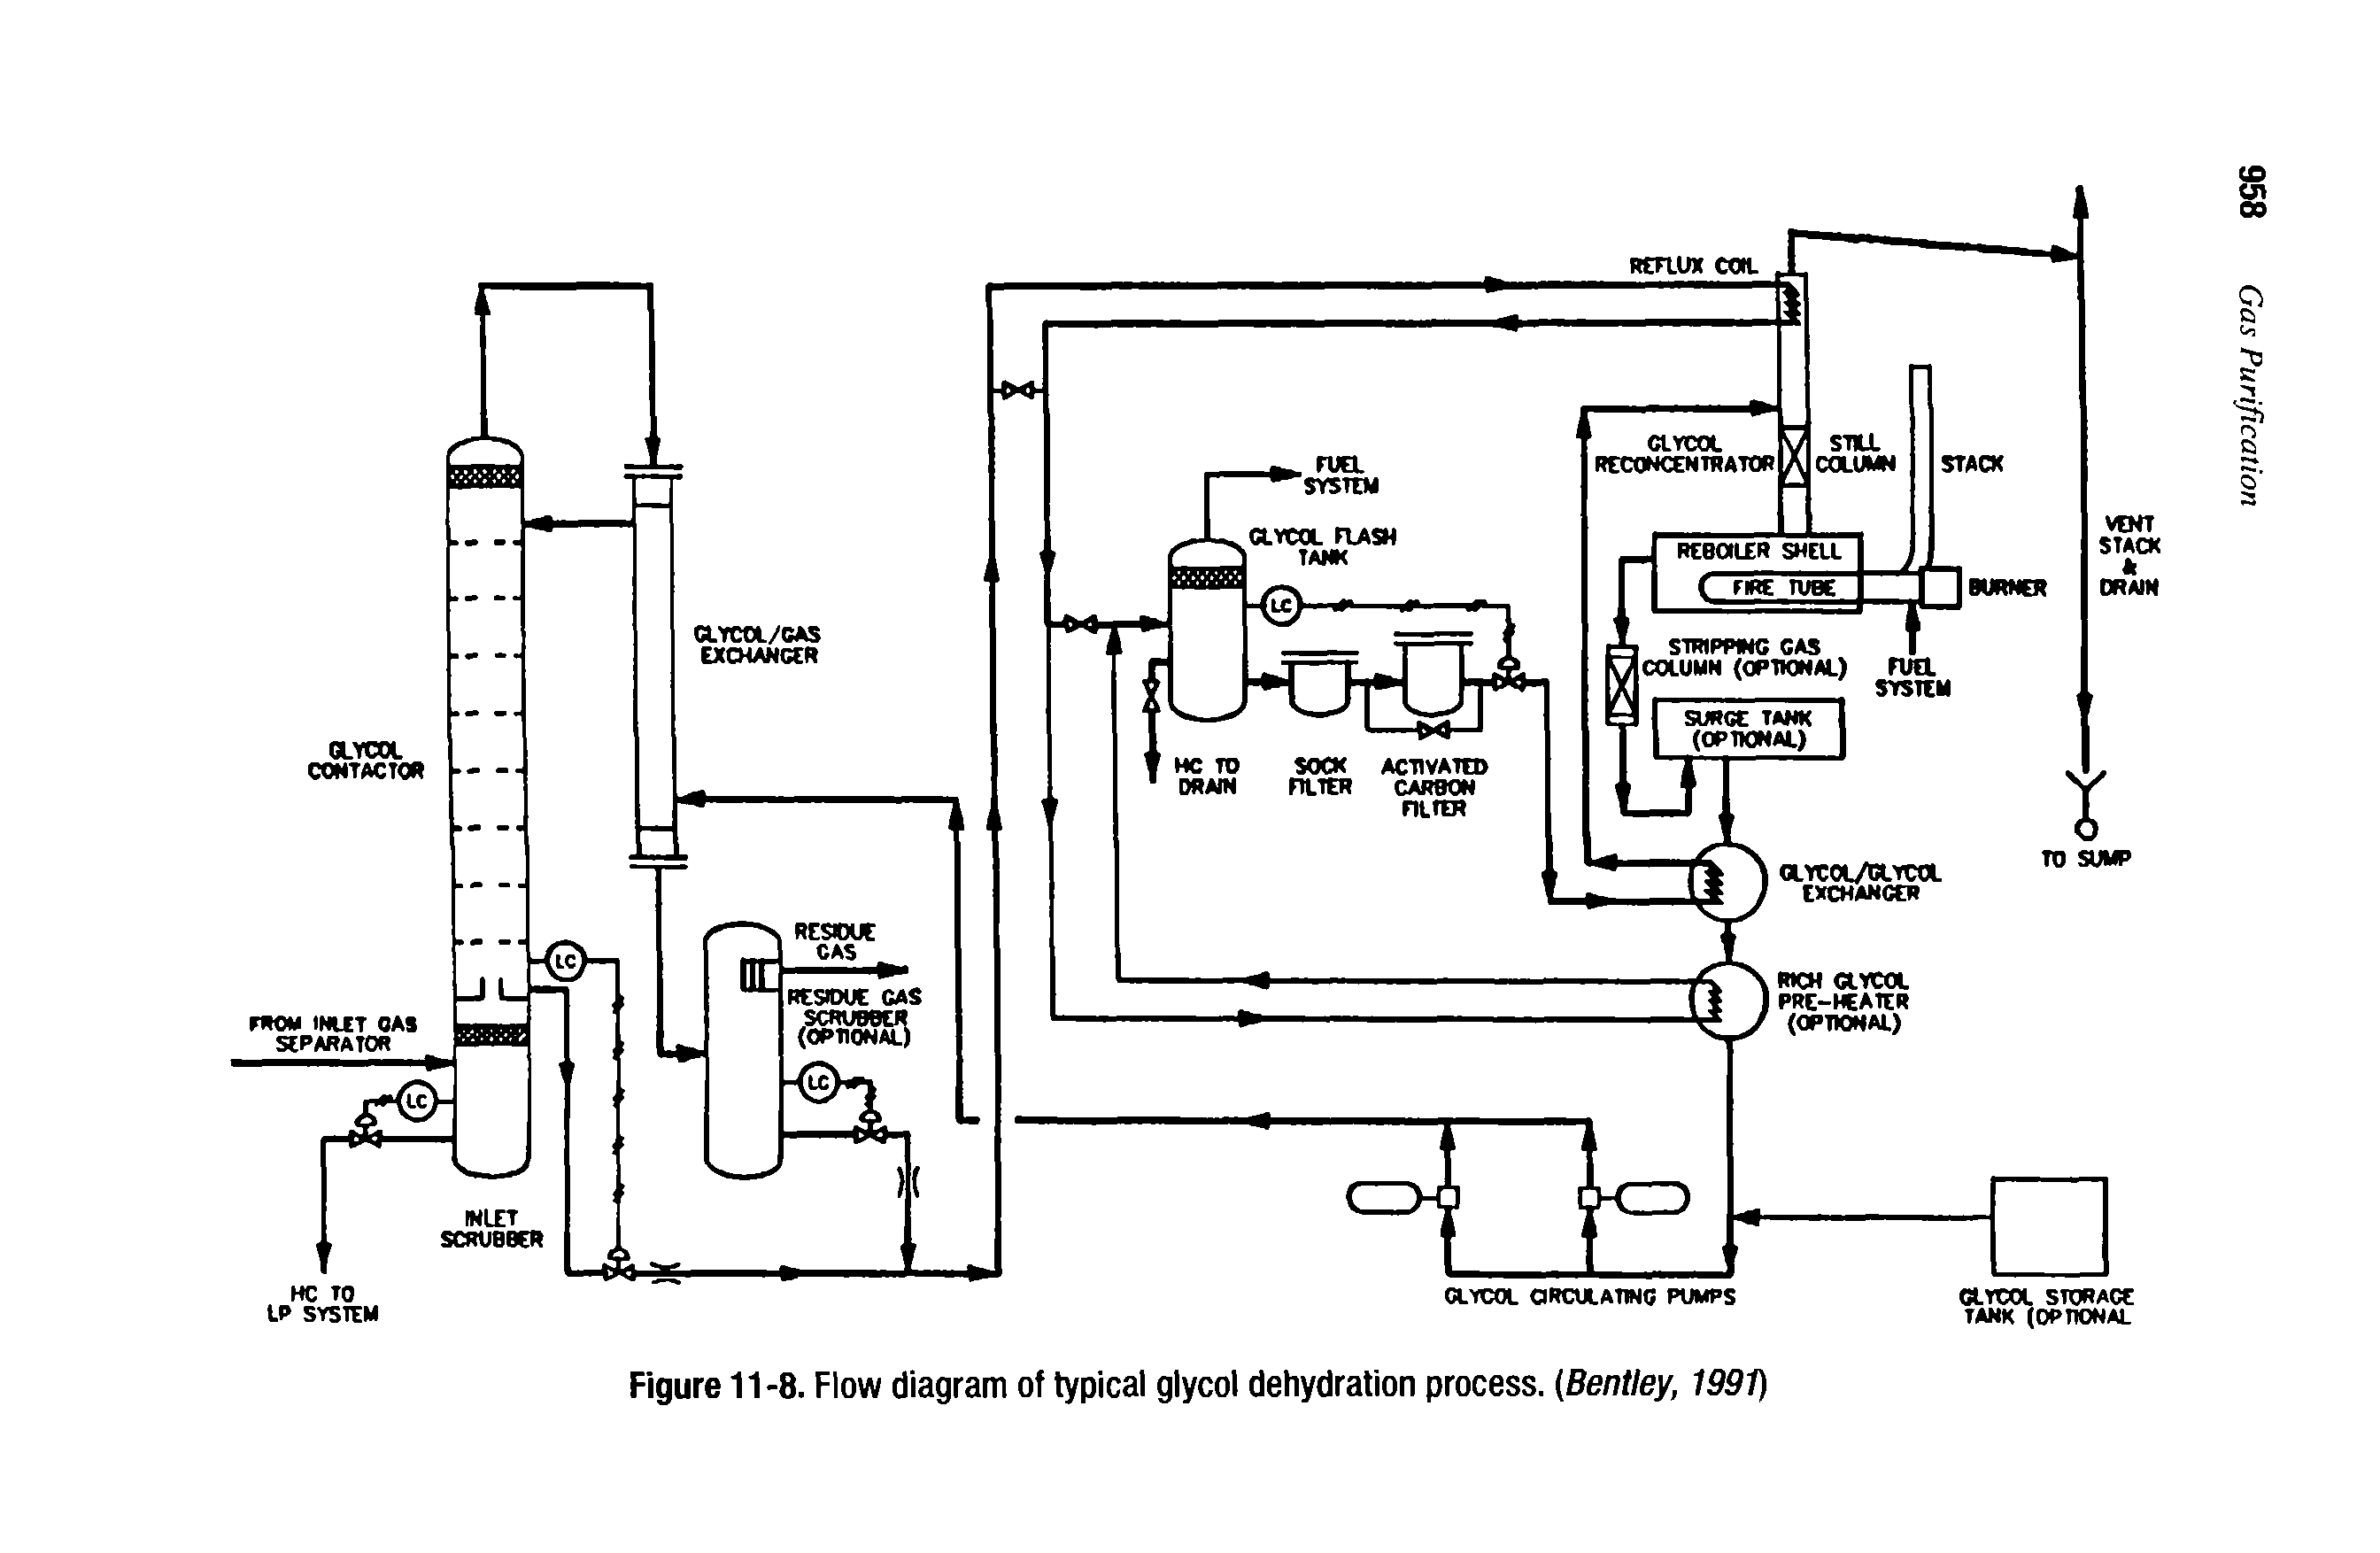 Figure 11-8. Flow diagram of typical glycol dehydration process. (Bentley, 1991)...